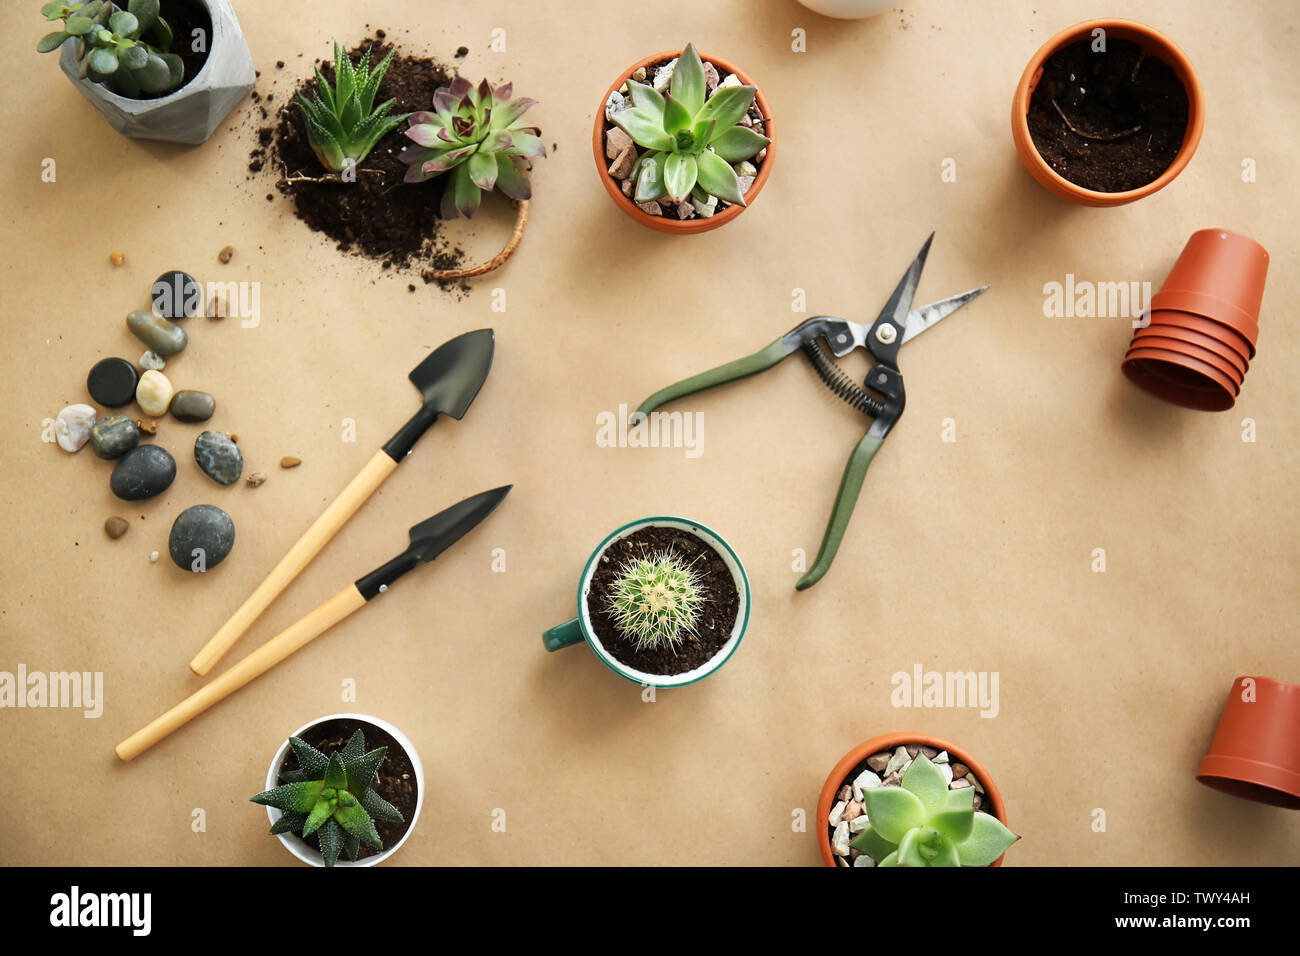 Succulents in pots gardening tools on table Stock Photo